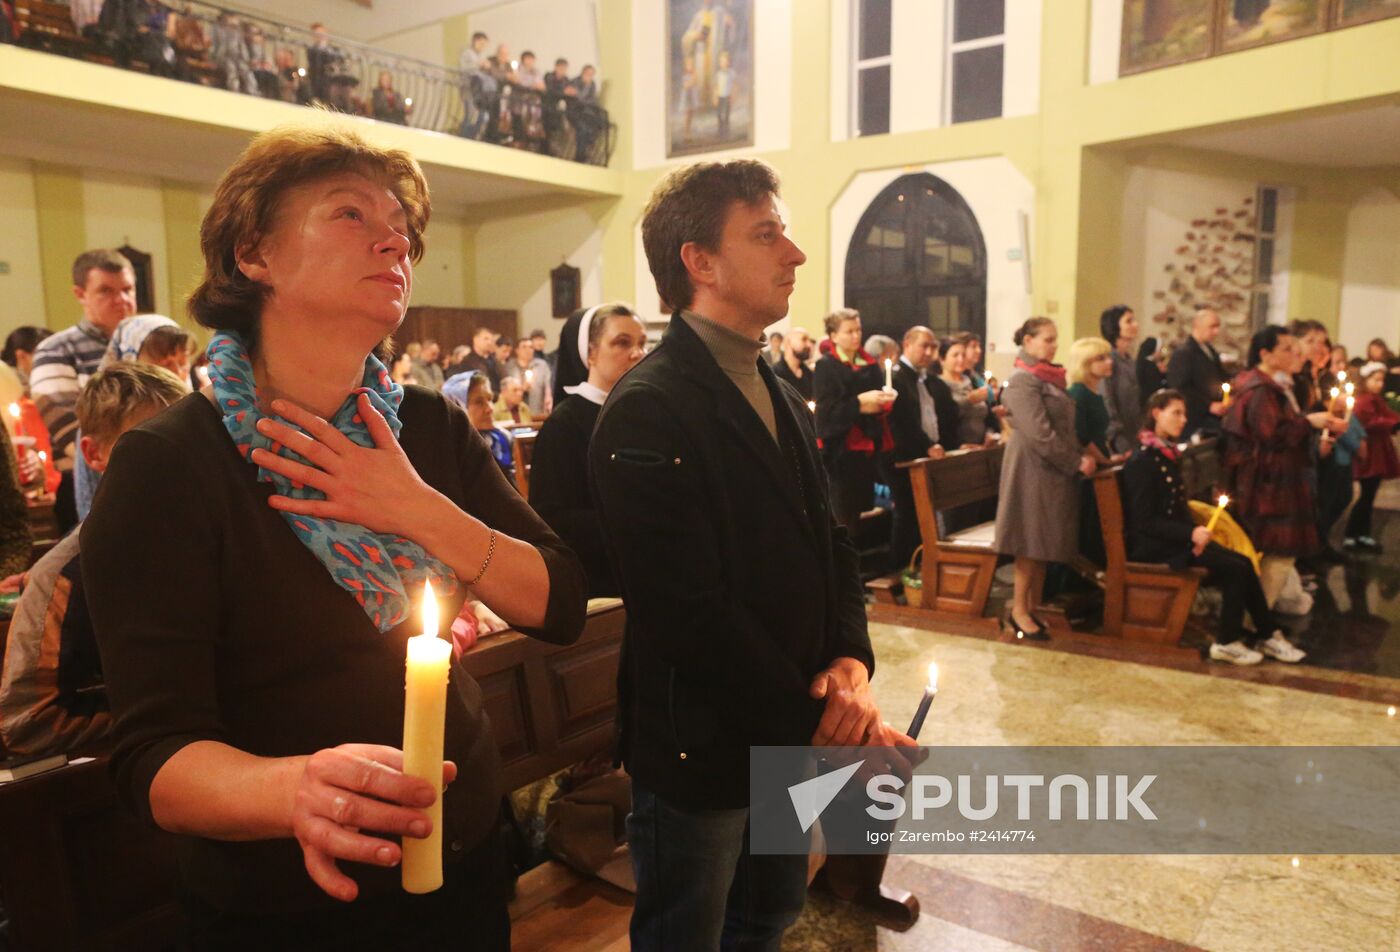 Catholic Easter celebrated in Russia